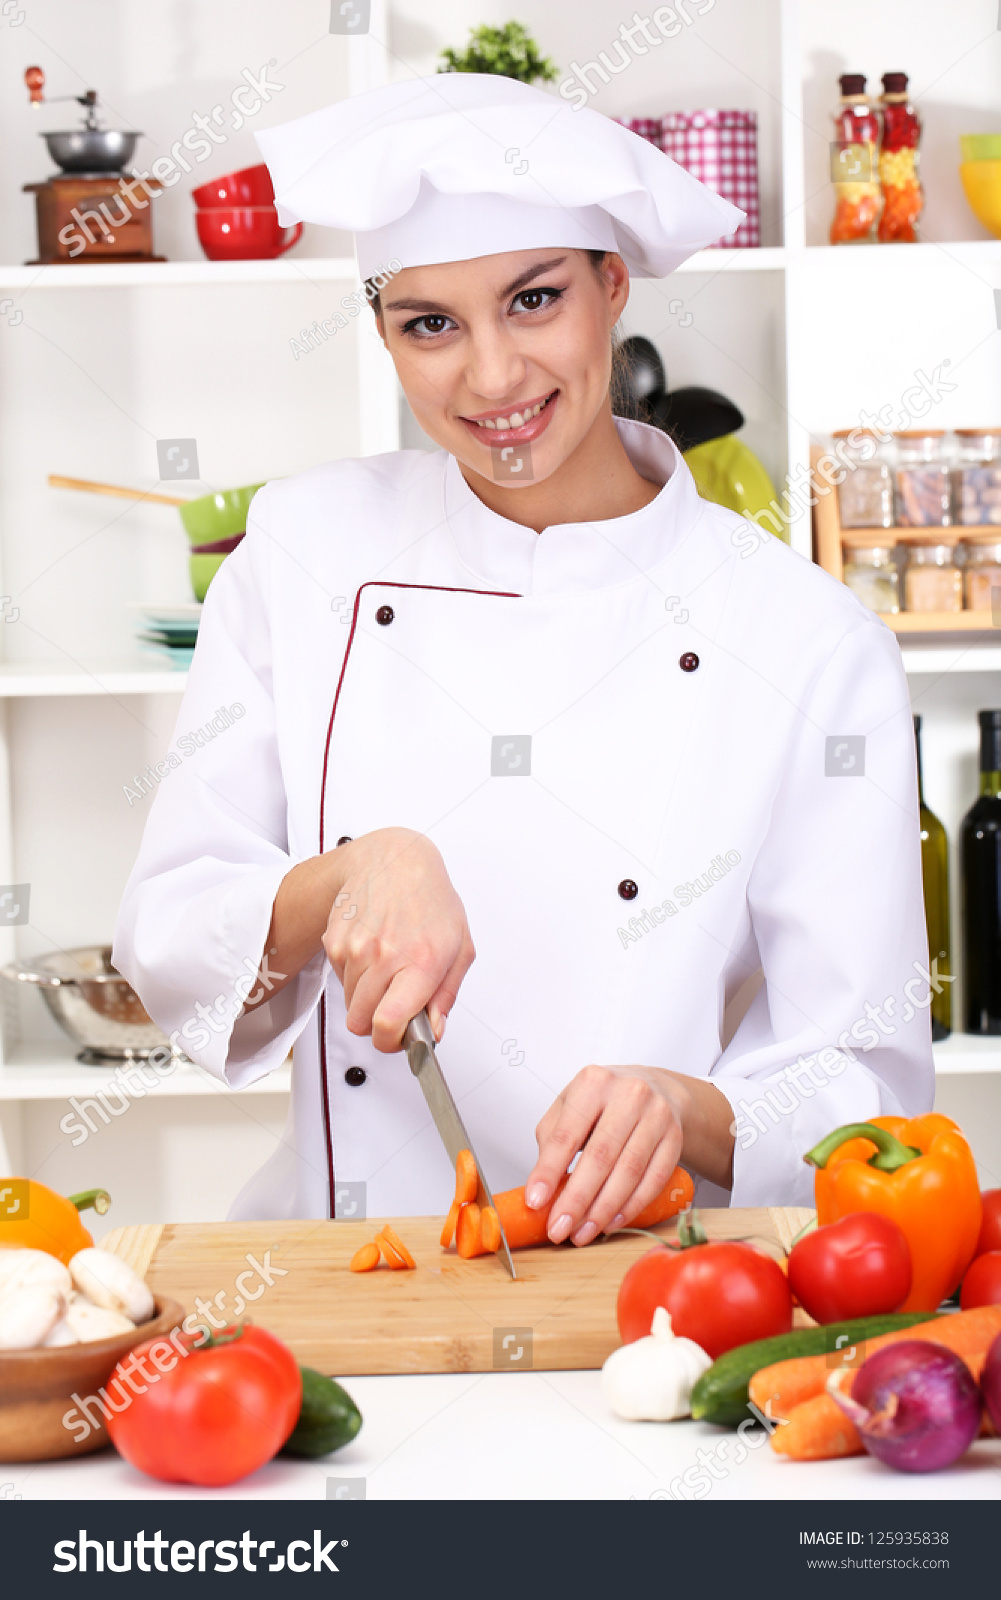 stock-photo-young-woman-chef-cooking-in-kitchen-125935838.jpg